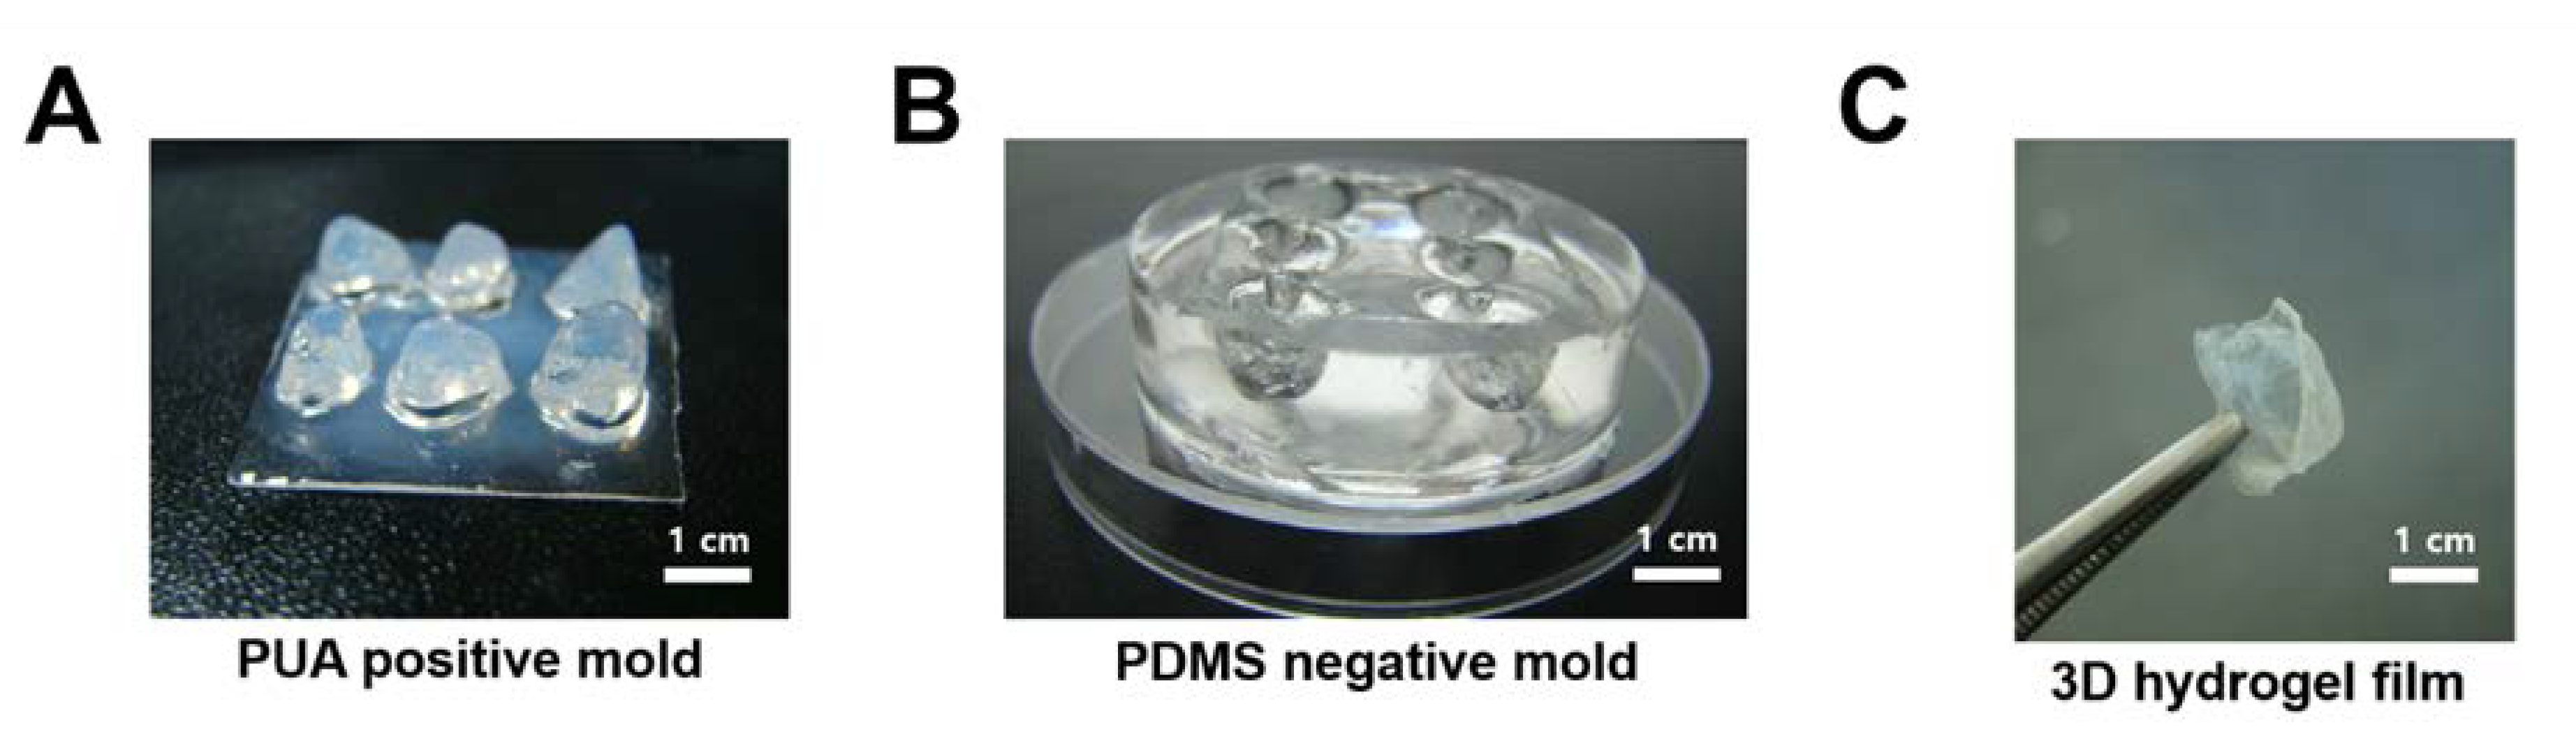 The Mold-maker device, the agarose molds it produces and the final